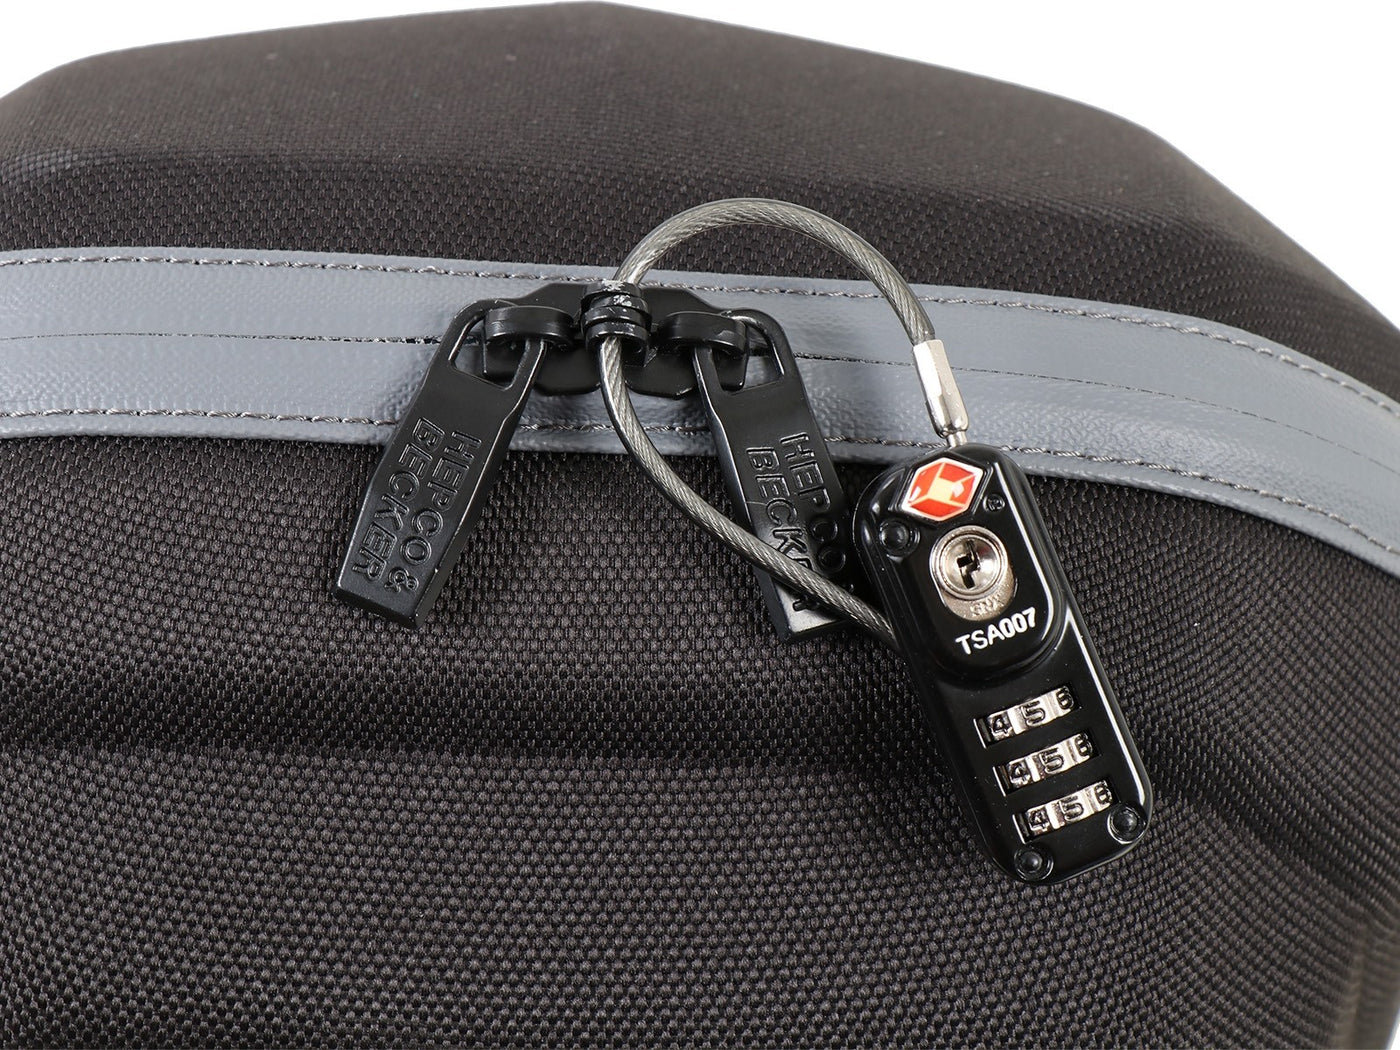 Anti-Theft Device for Hepco&Becker Tank Bags